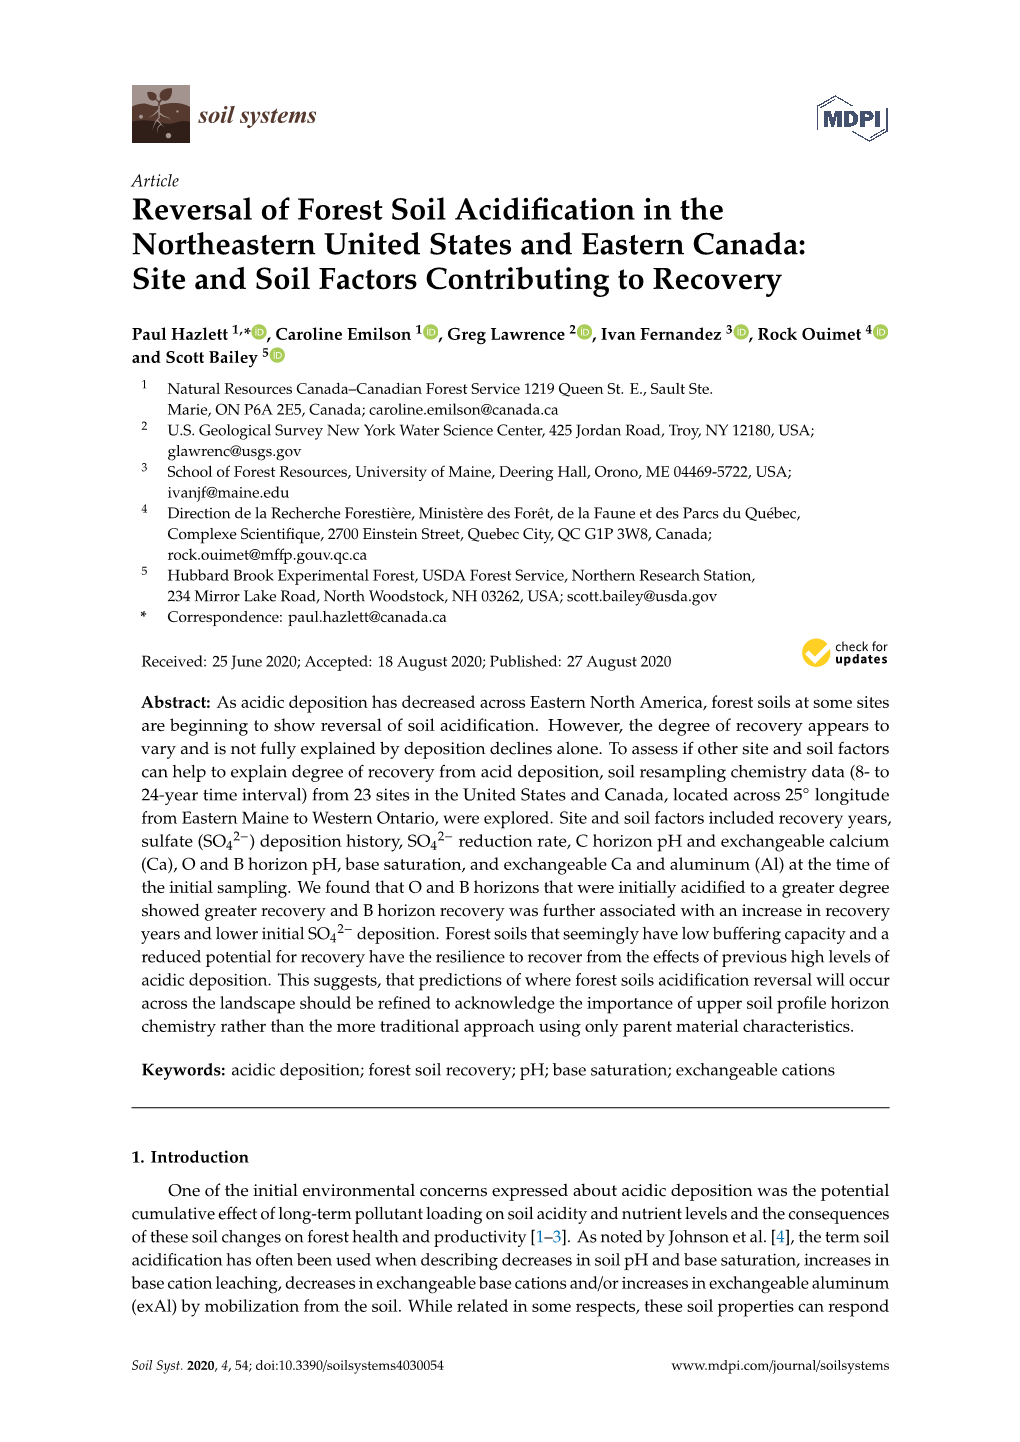 Reversal of Forest Soil Acidification in the Northeastern United States and Eastern Canada